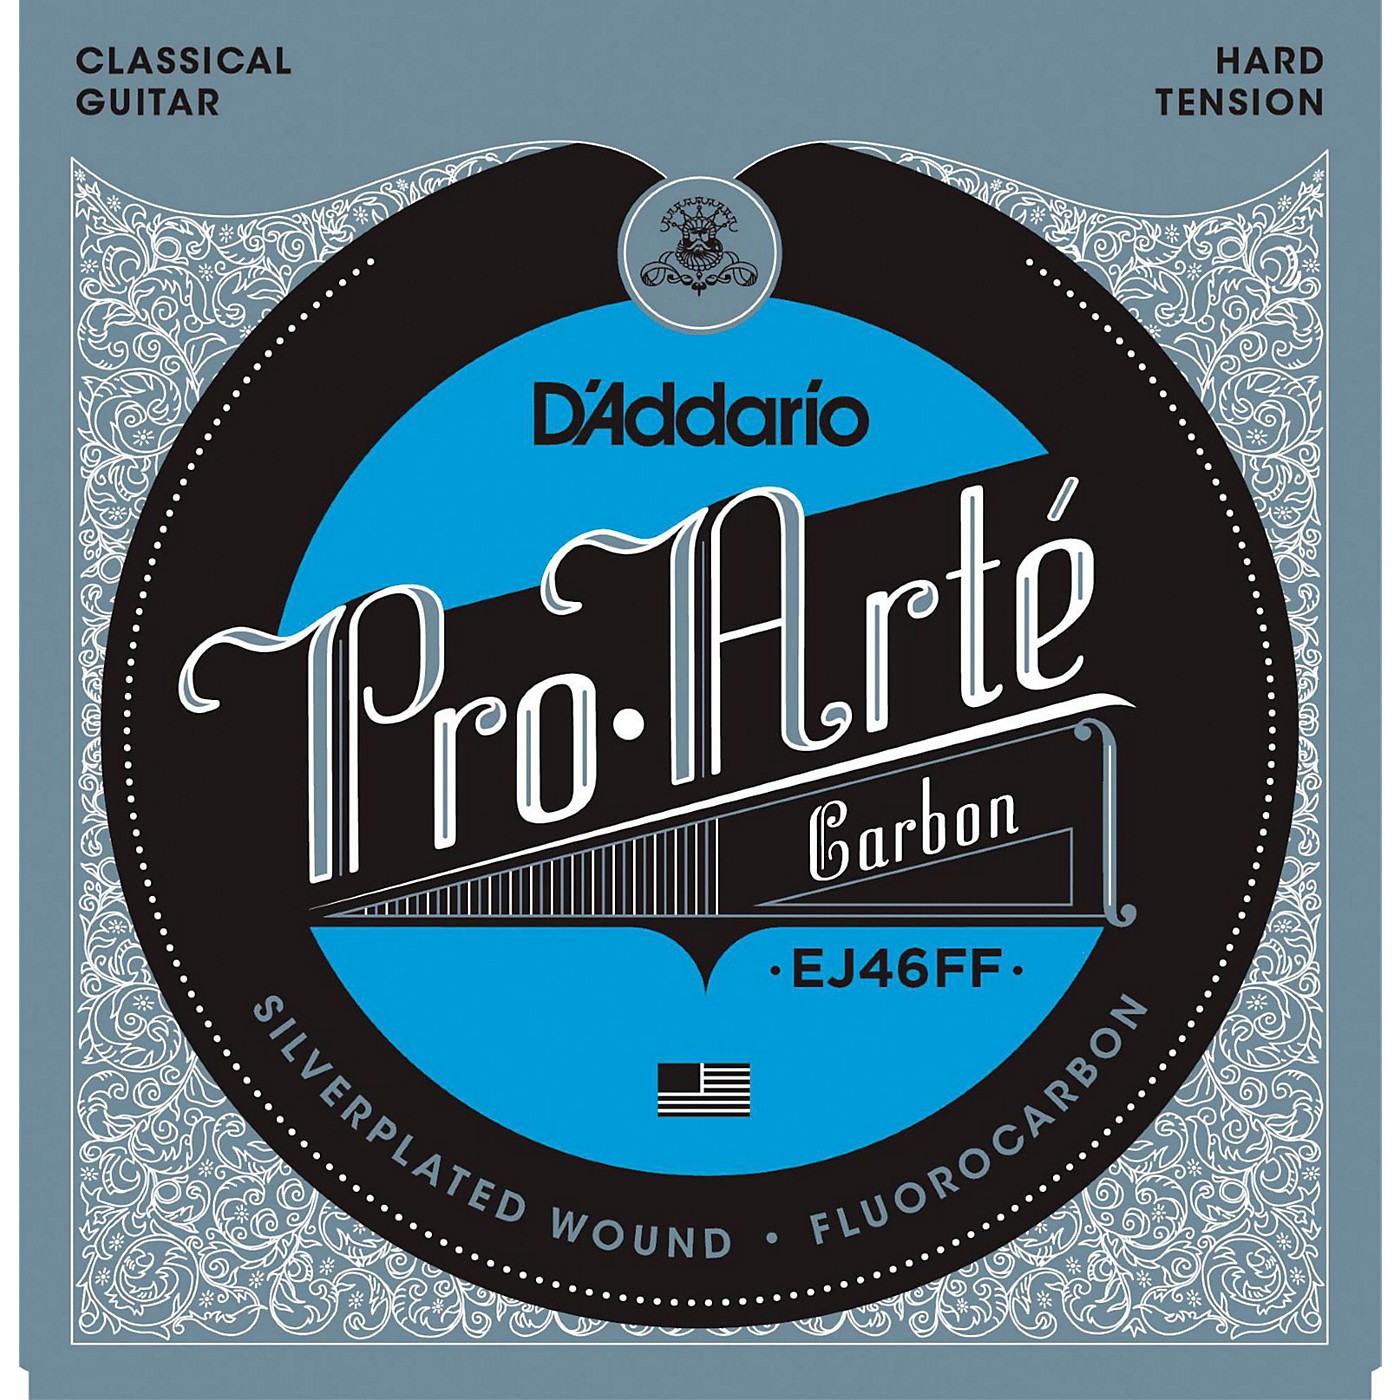 D'Addario Pro-Arte Carbon with Dynacore Basses - Hard Tension Classical Guitar Strings thumbnail